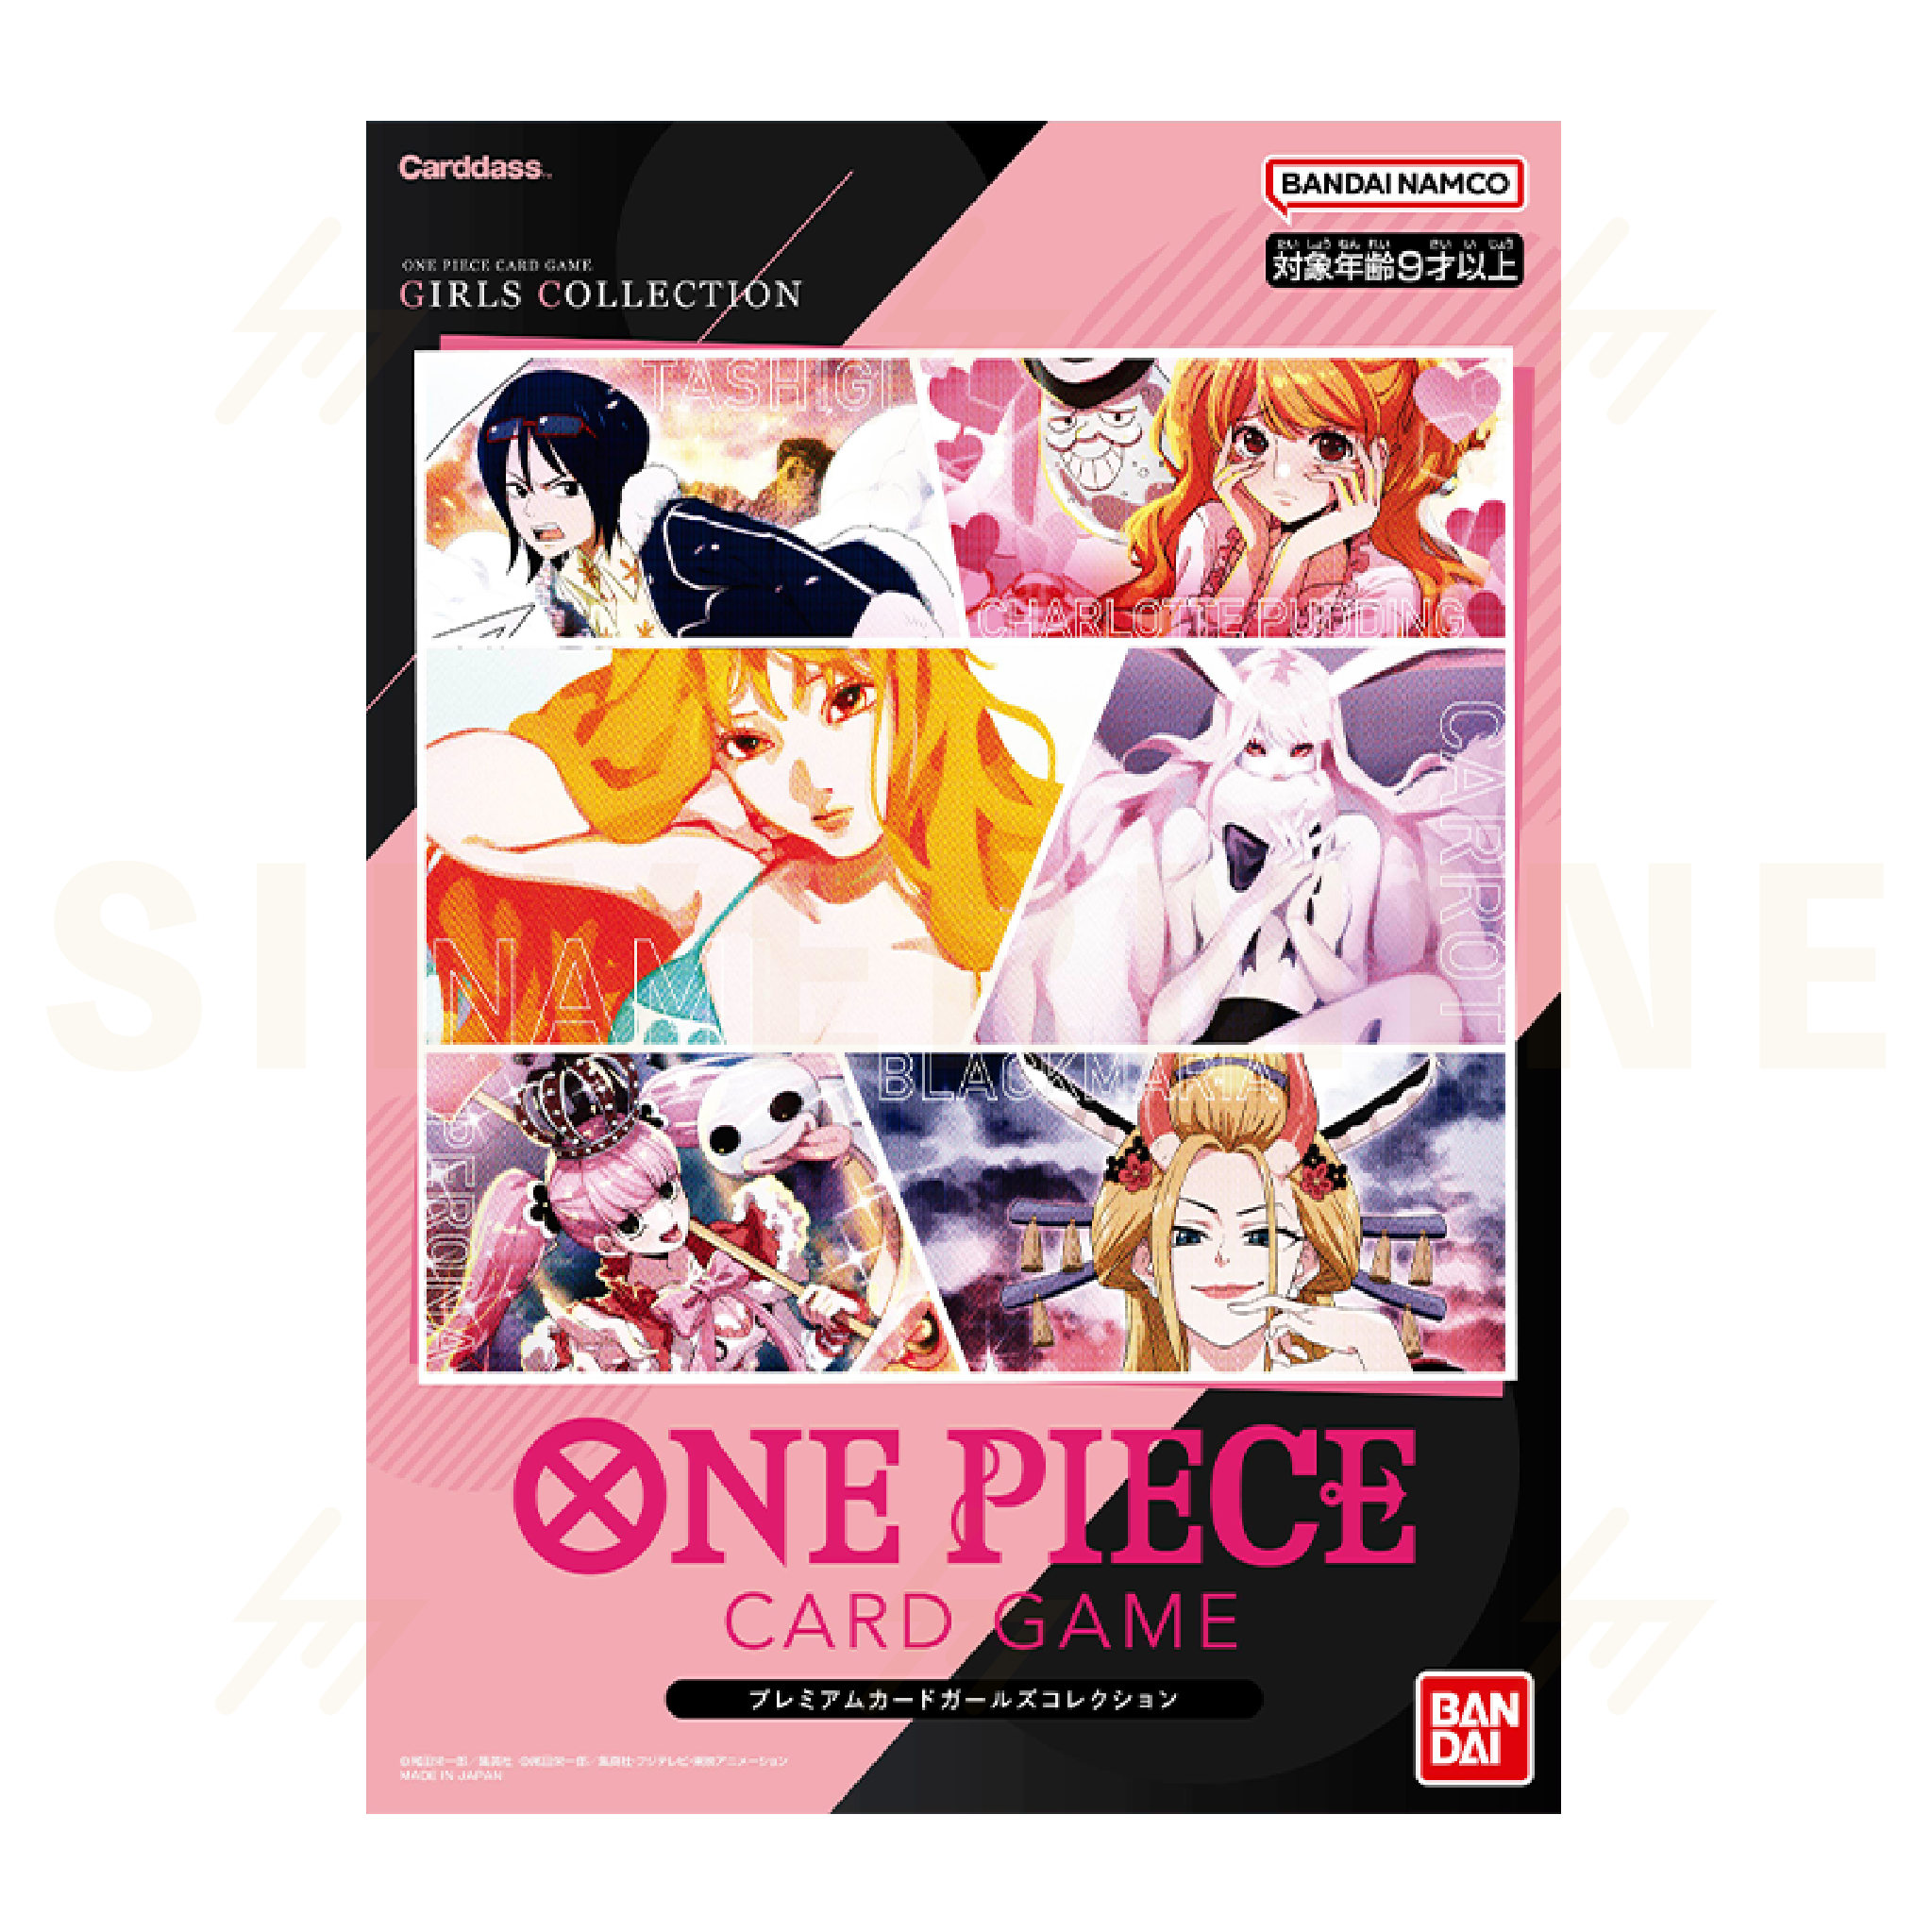 One Piece - Premium Card Collection - Girls Edition -